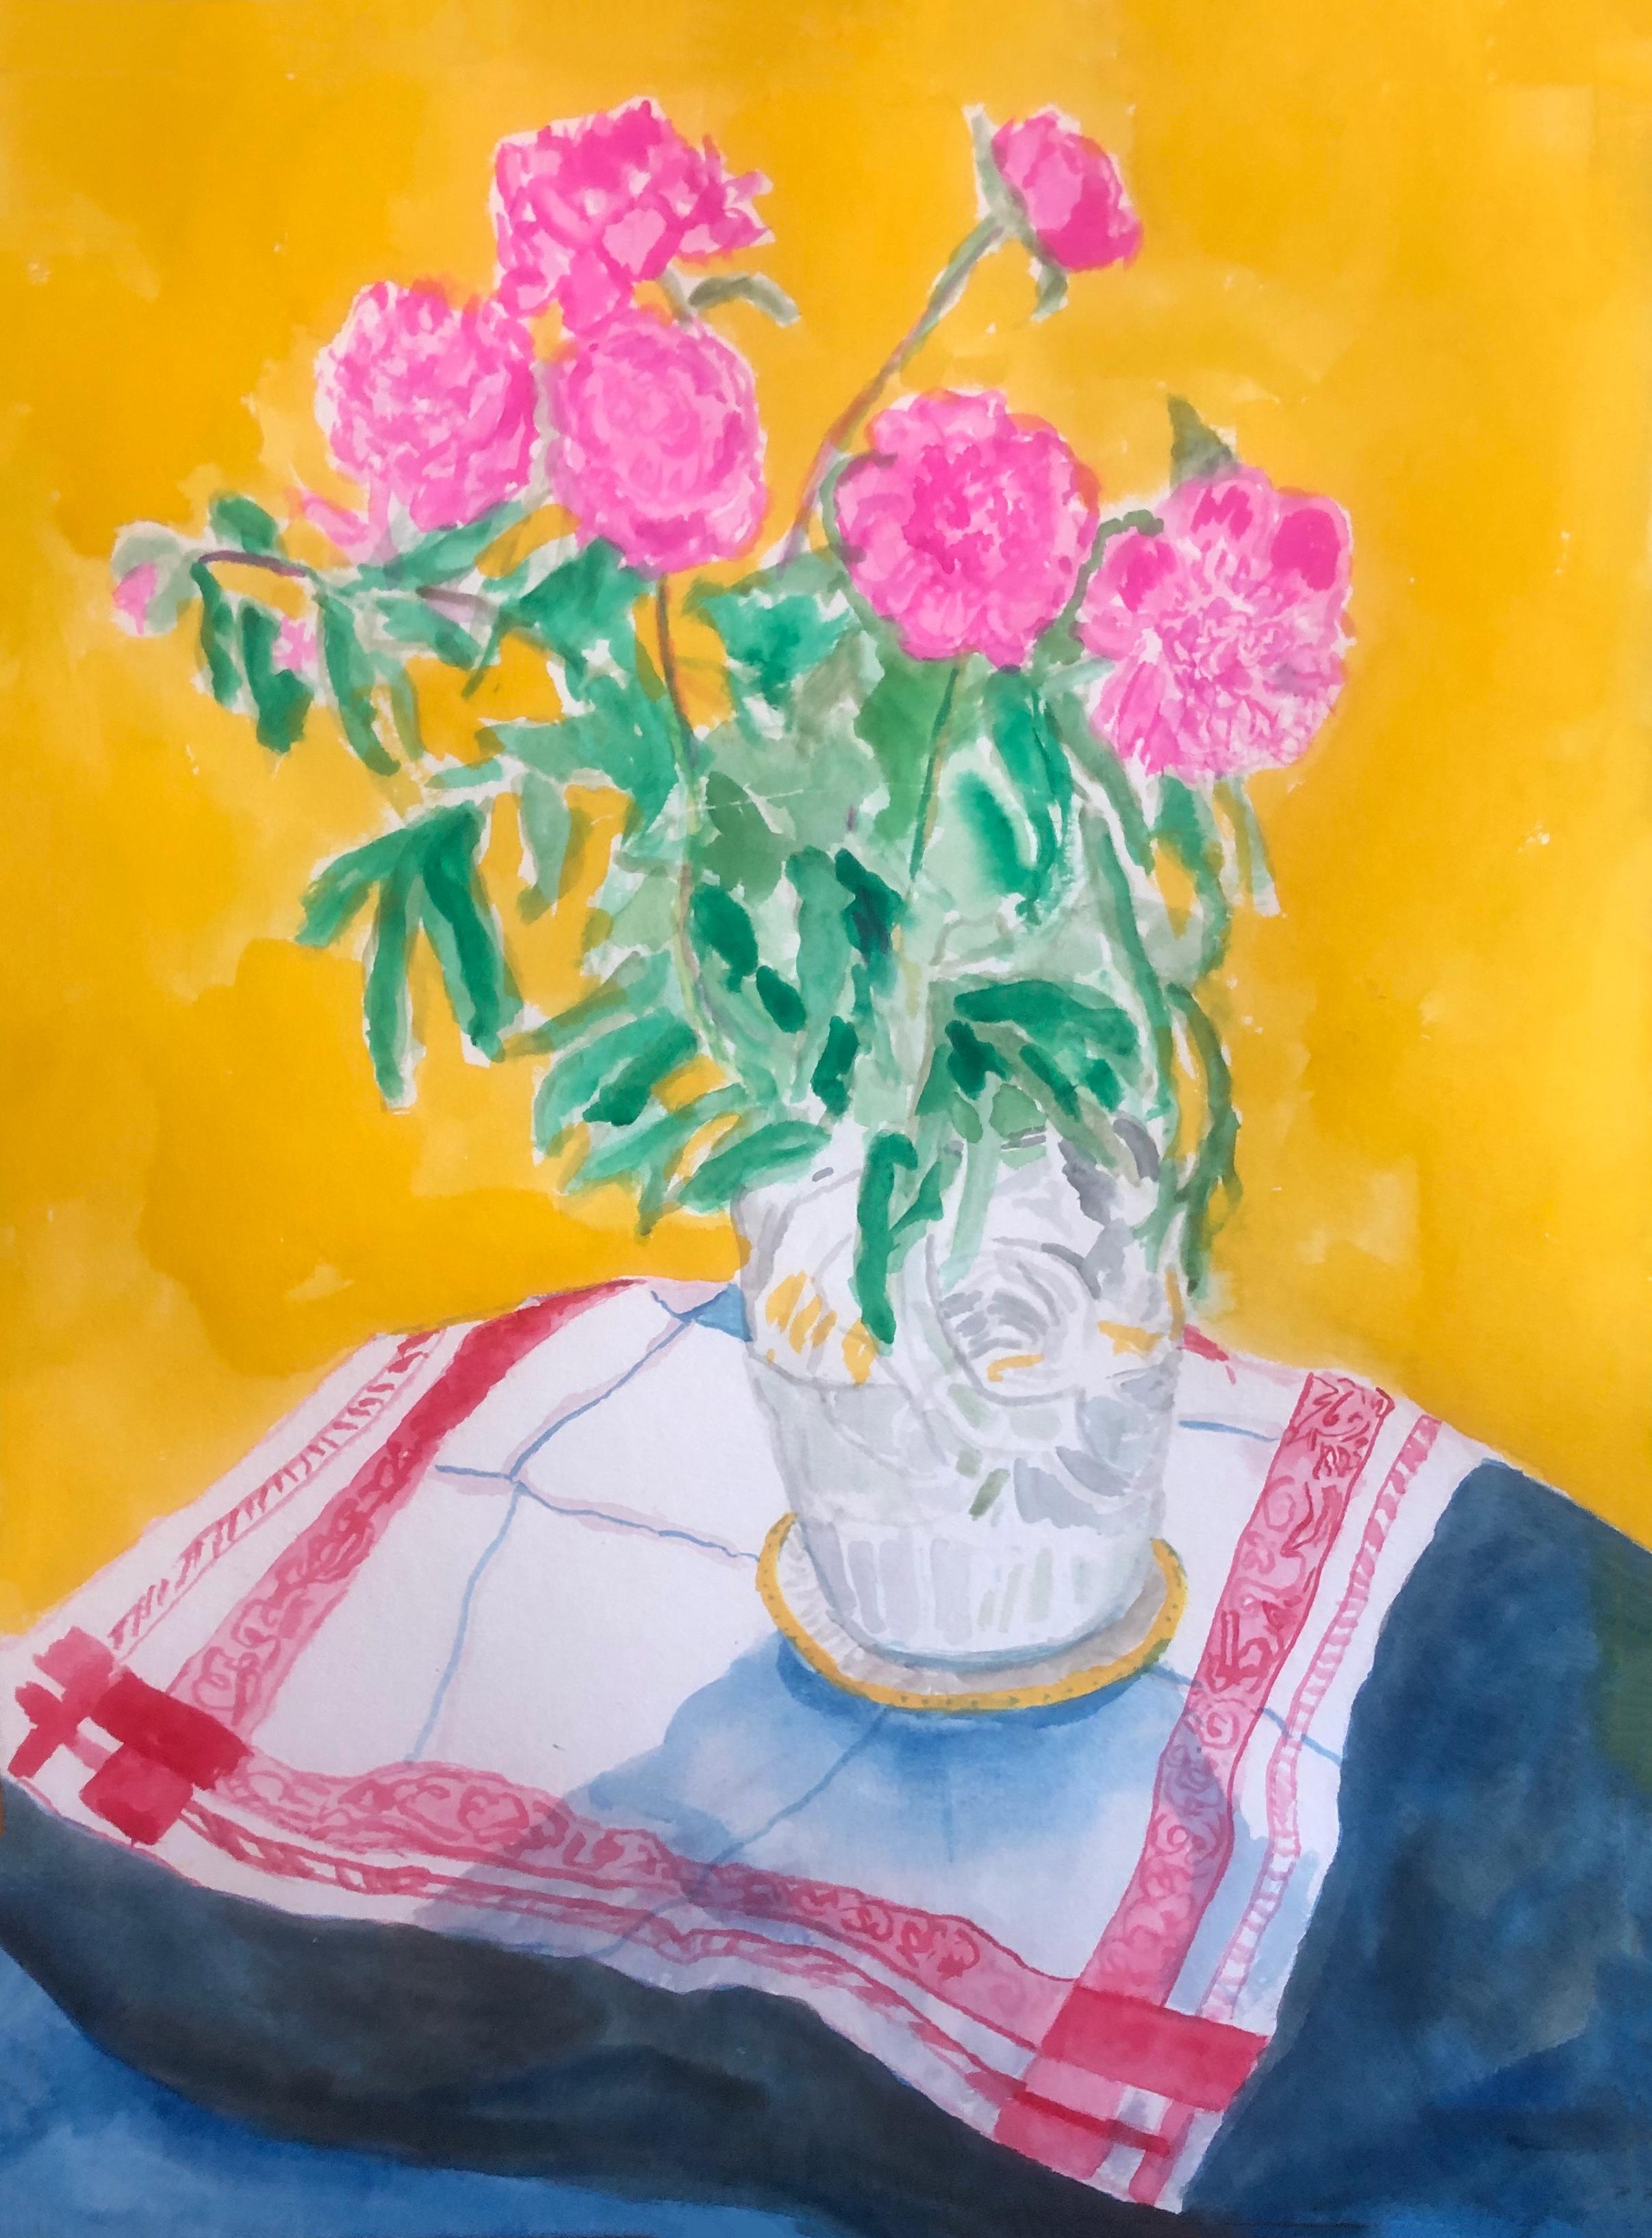 Charlie Scheips Still-Life - Vase of Peonies on French Napkin. Painting  From the Still Life Series